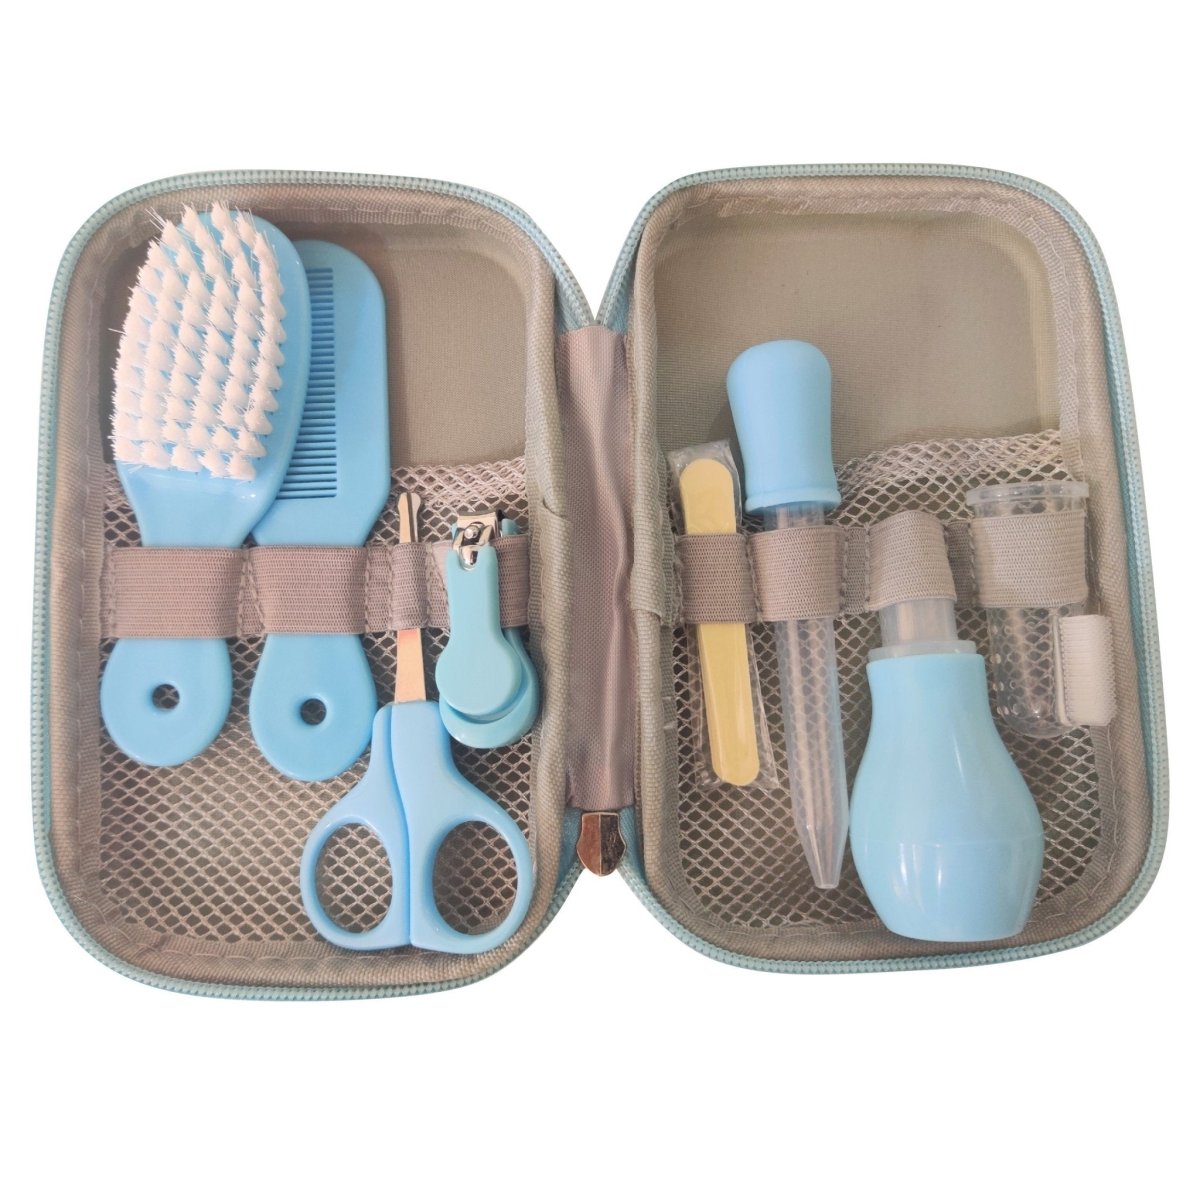 Baby Travel and Grooming Kit- Blue - BAB-GRM-BLU